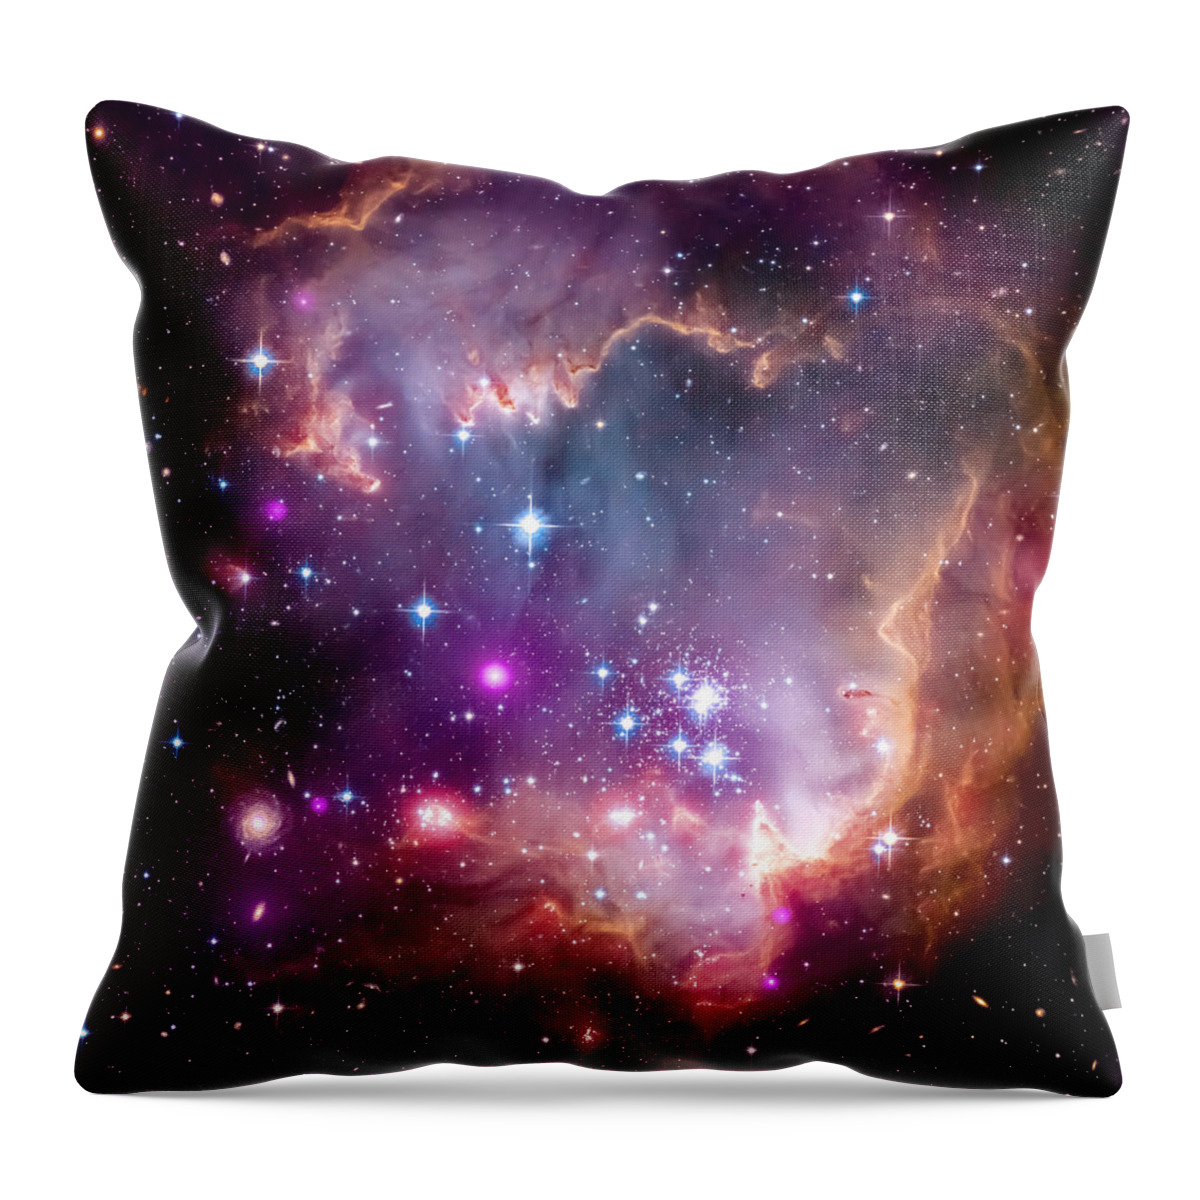 #faatoppicks Throw Pillow featuring the photograph Magellanic Cloud 3 by Jennifer Rondinelli Reilly - Fine Art Photography